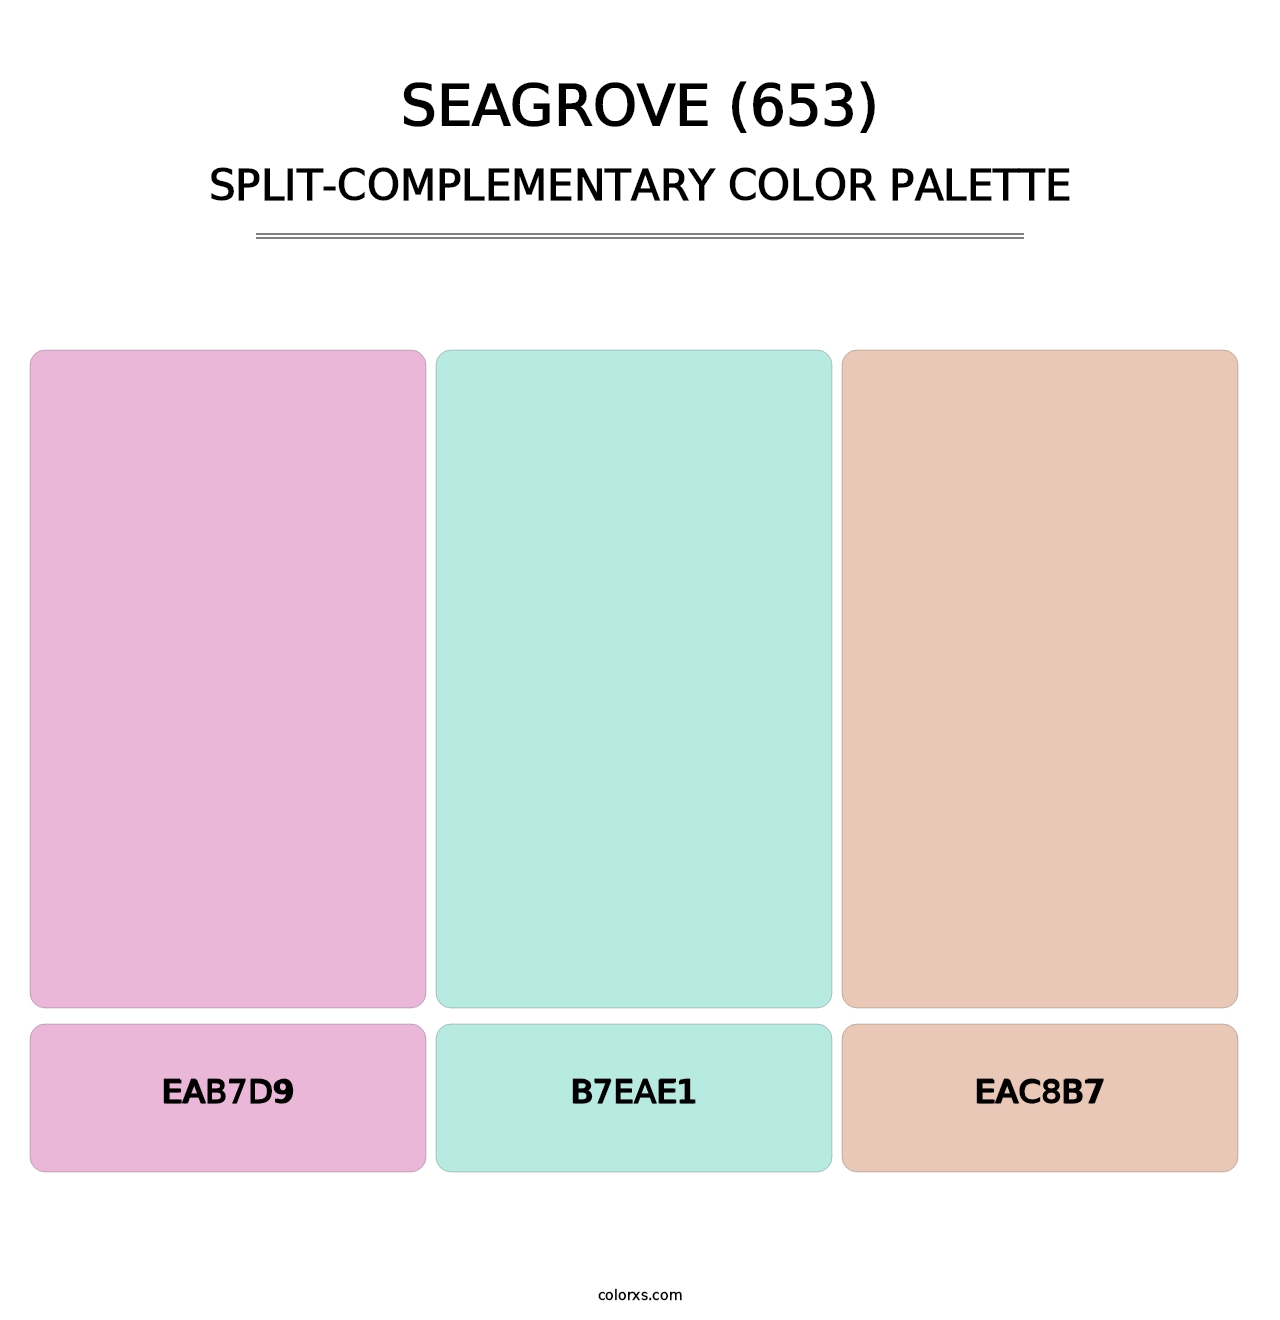 Seagrove (653) - Split-Complementary Color Palette